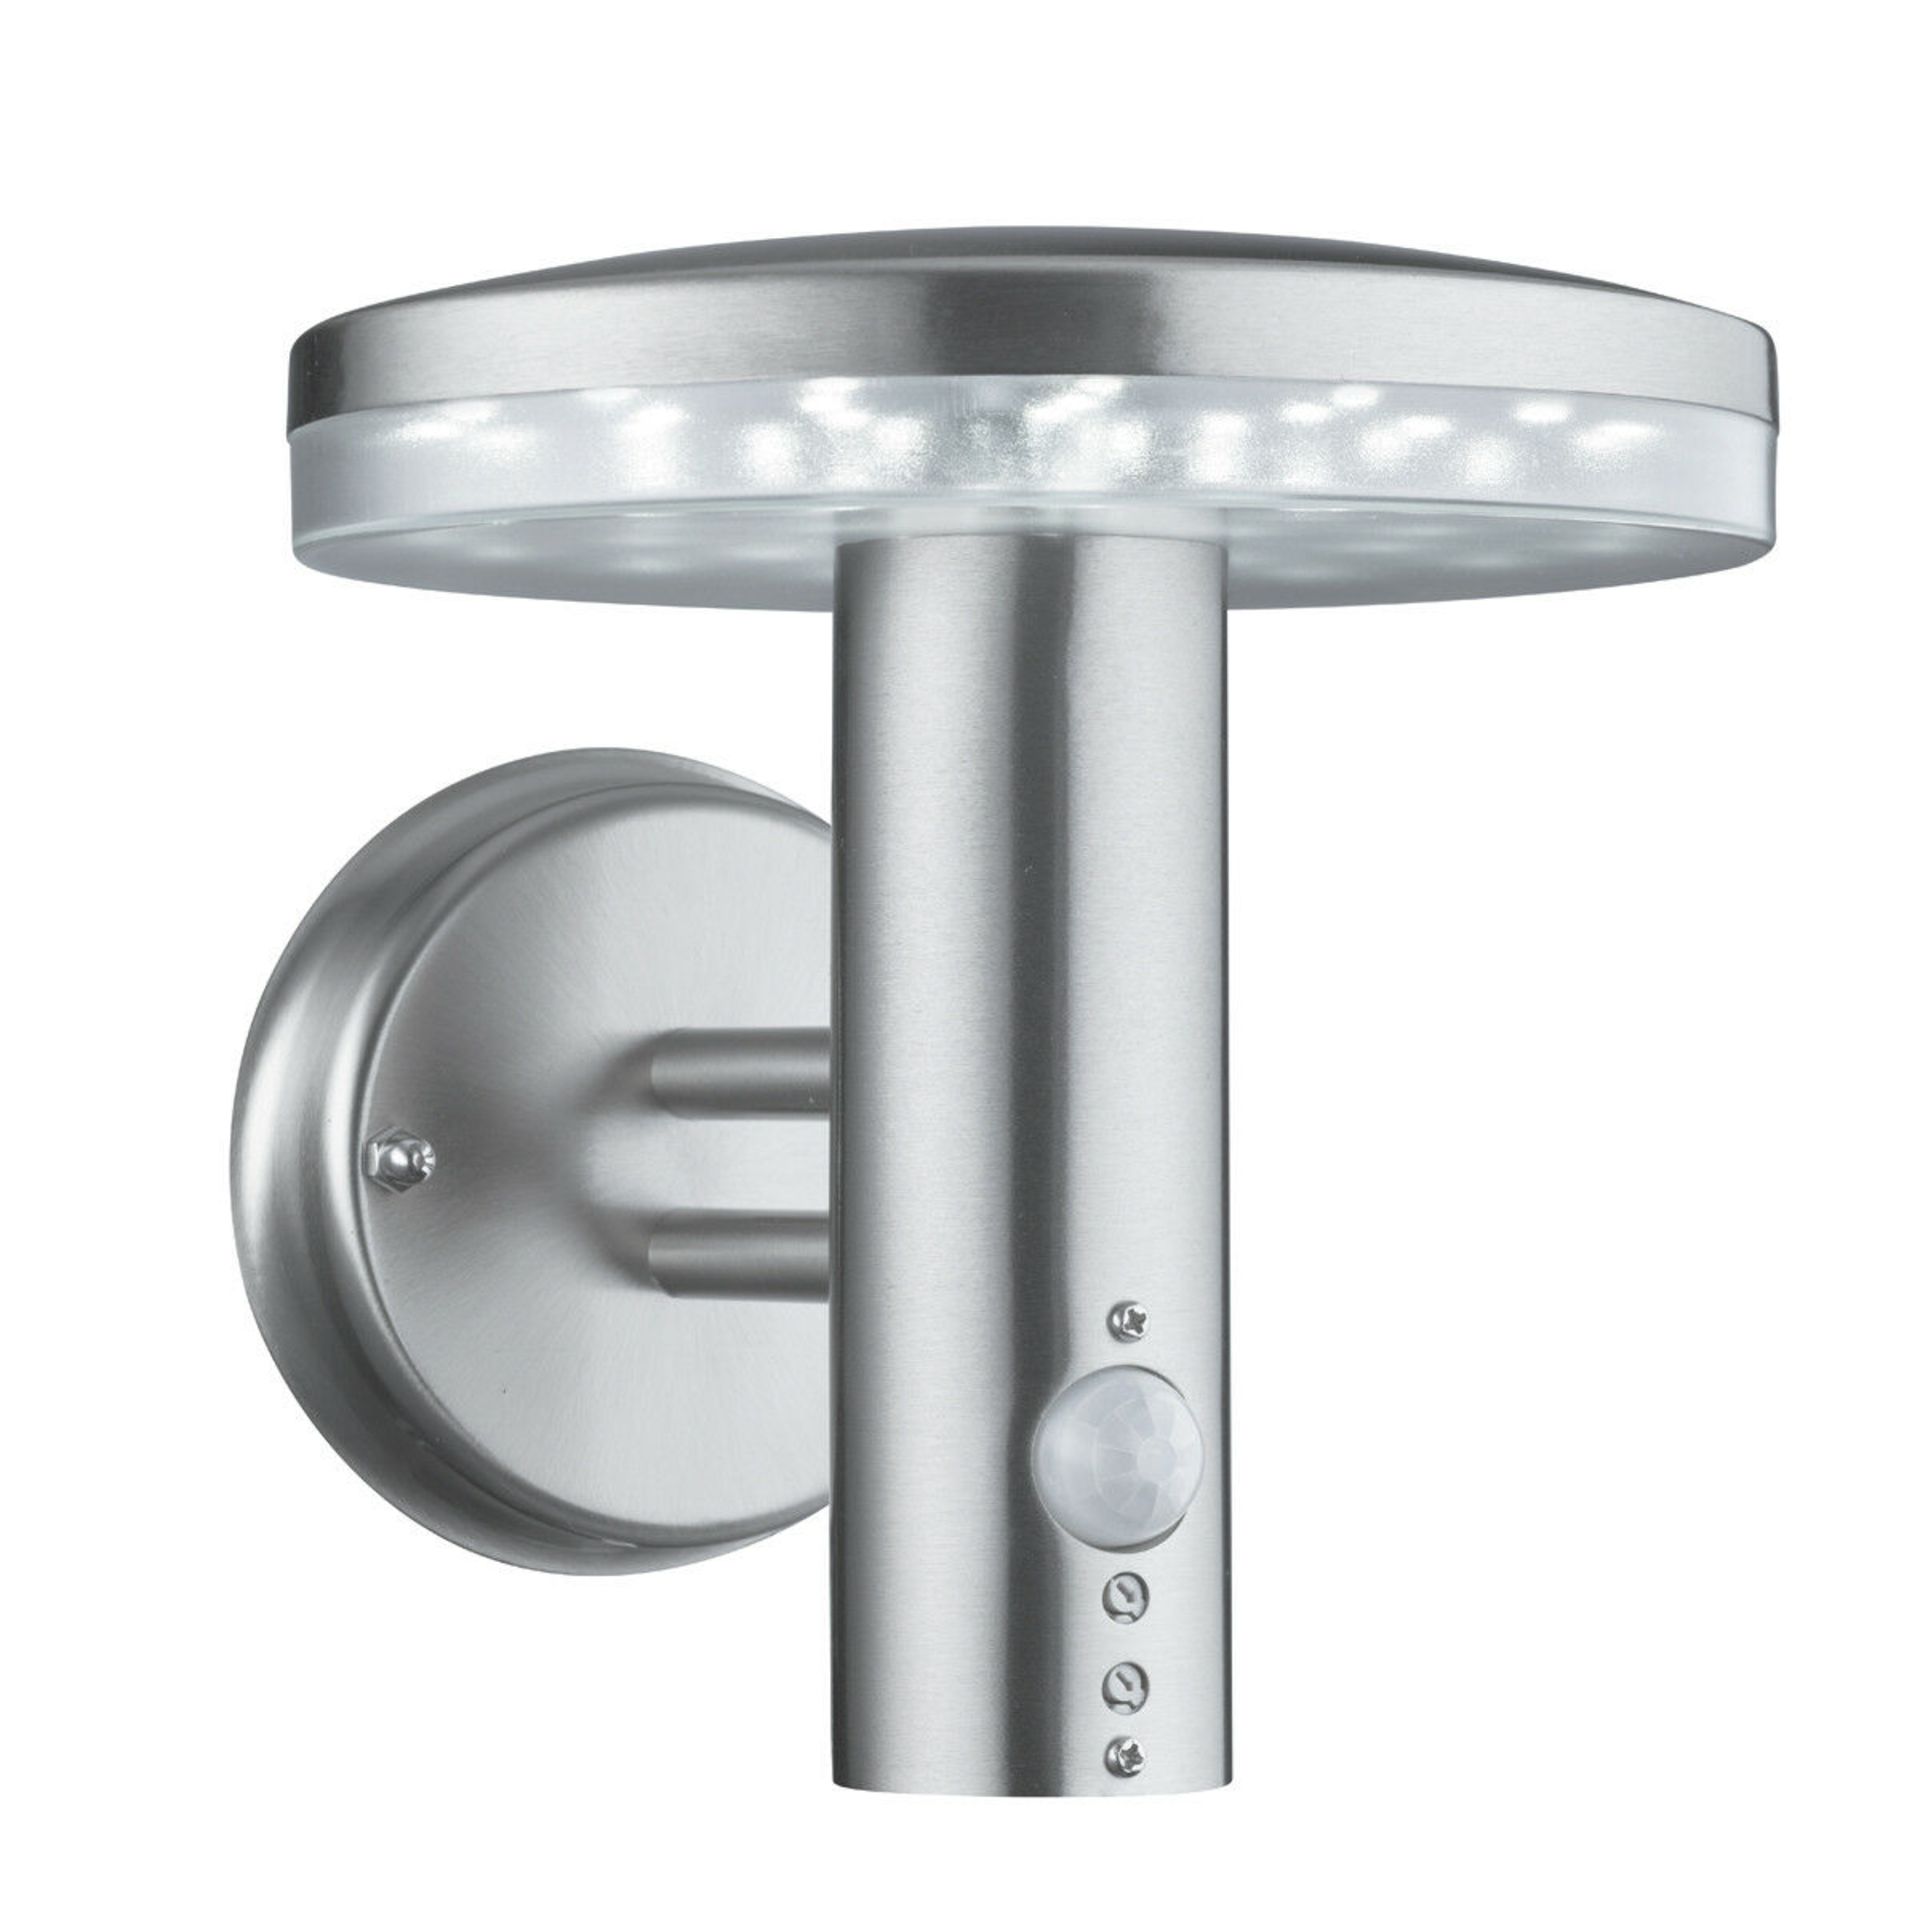 1 x SearchlightOutdoor LED Wall Light in Brushed Chrome IP44 - Product Code 4774 - New Boxed Stock - - Image 2 of 2